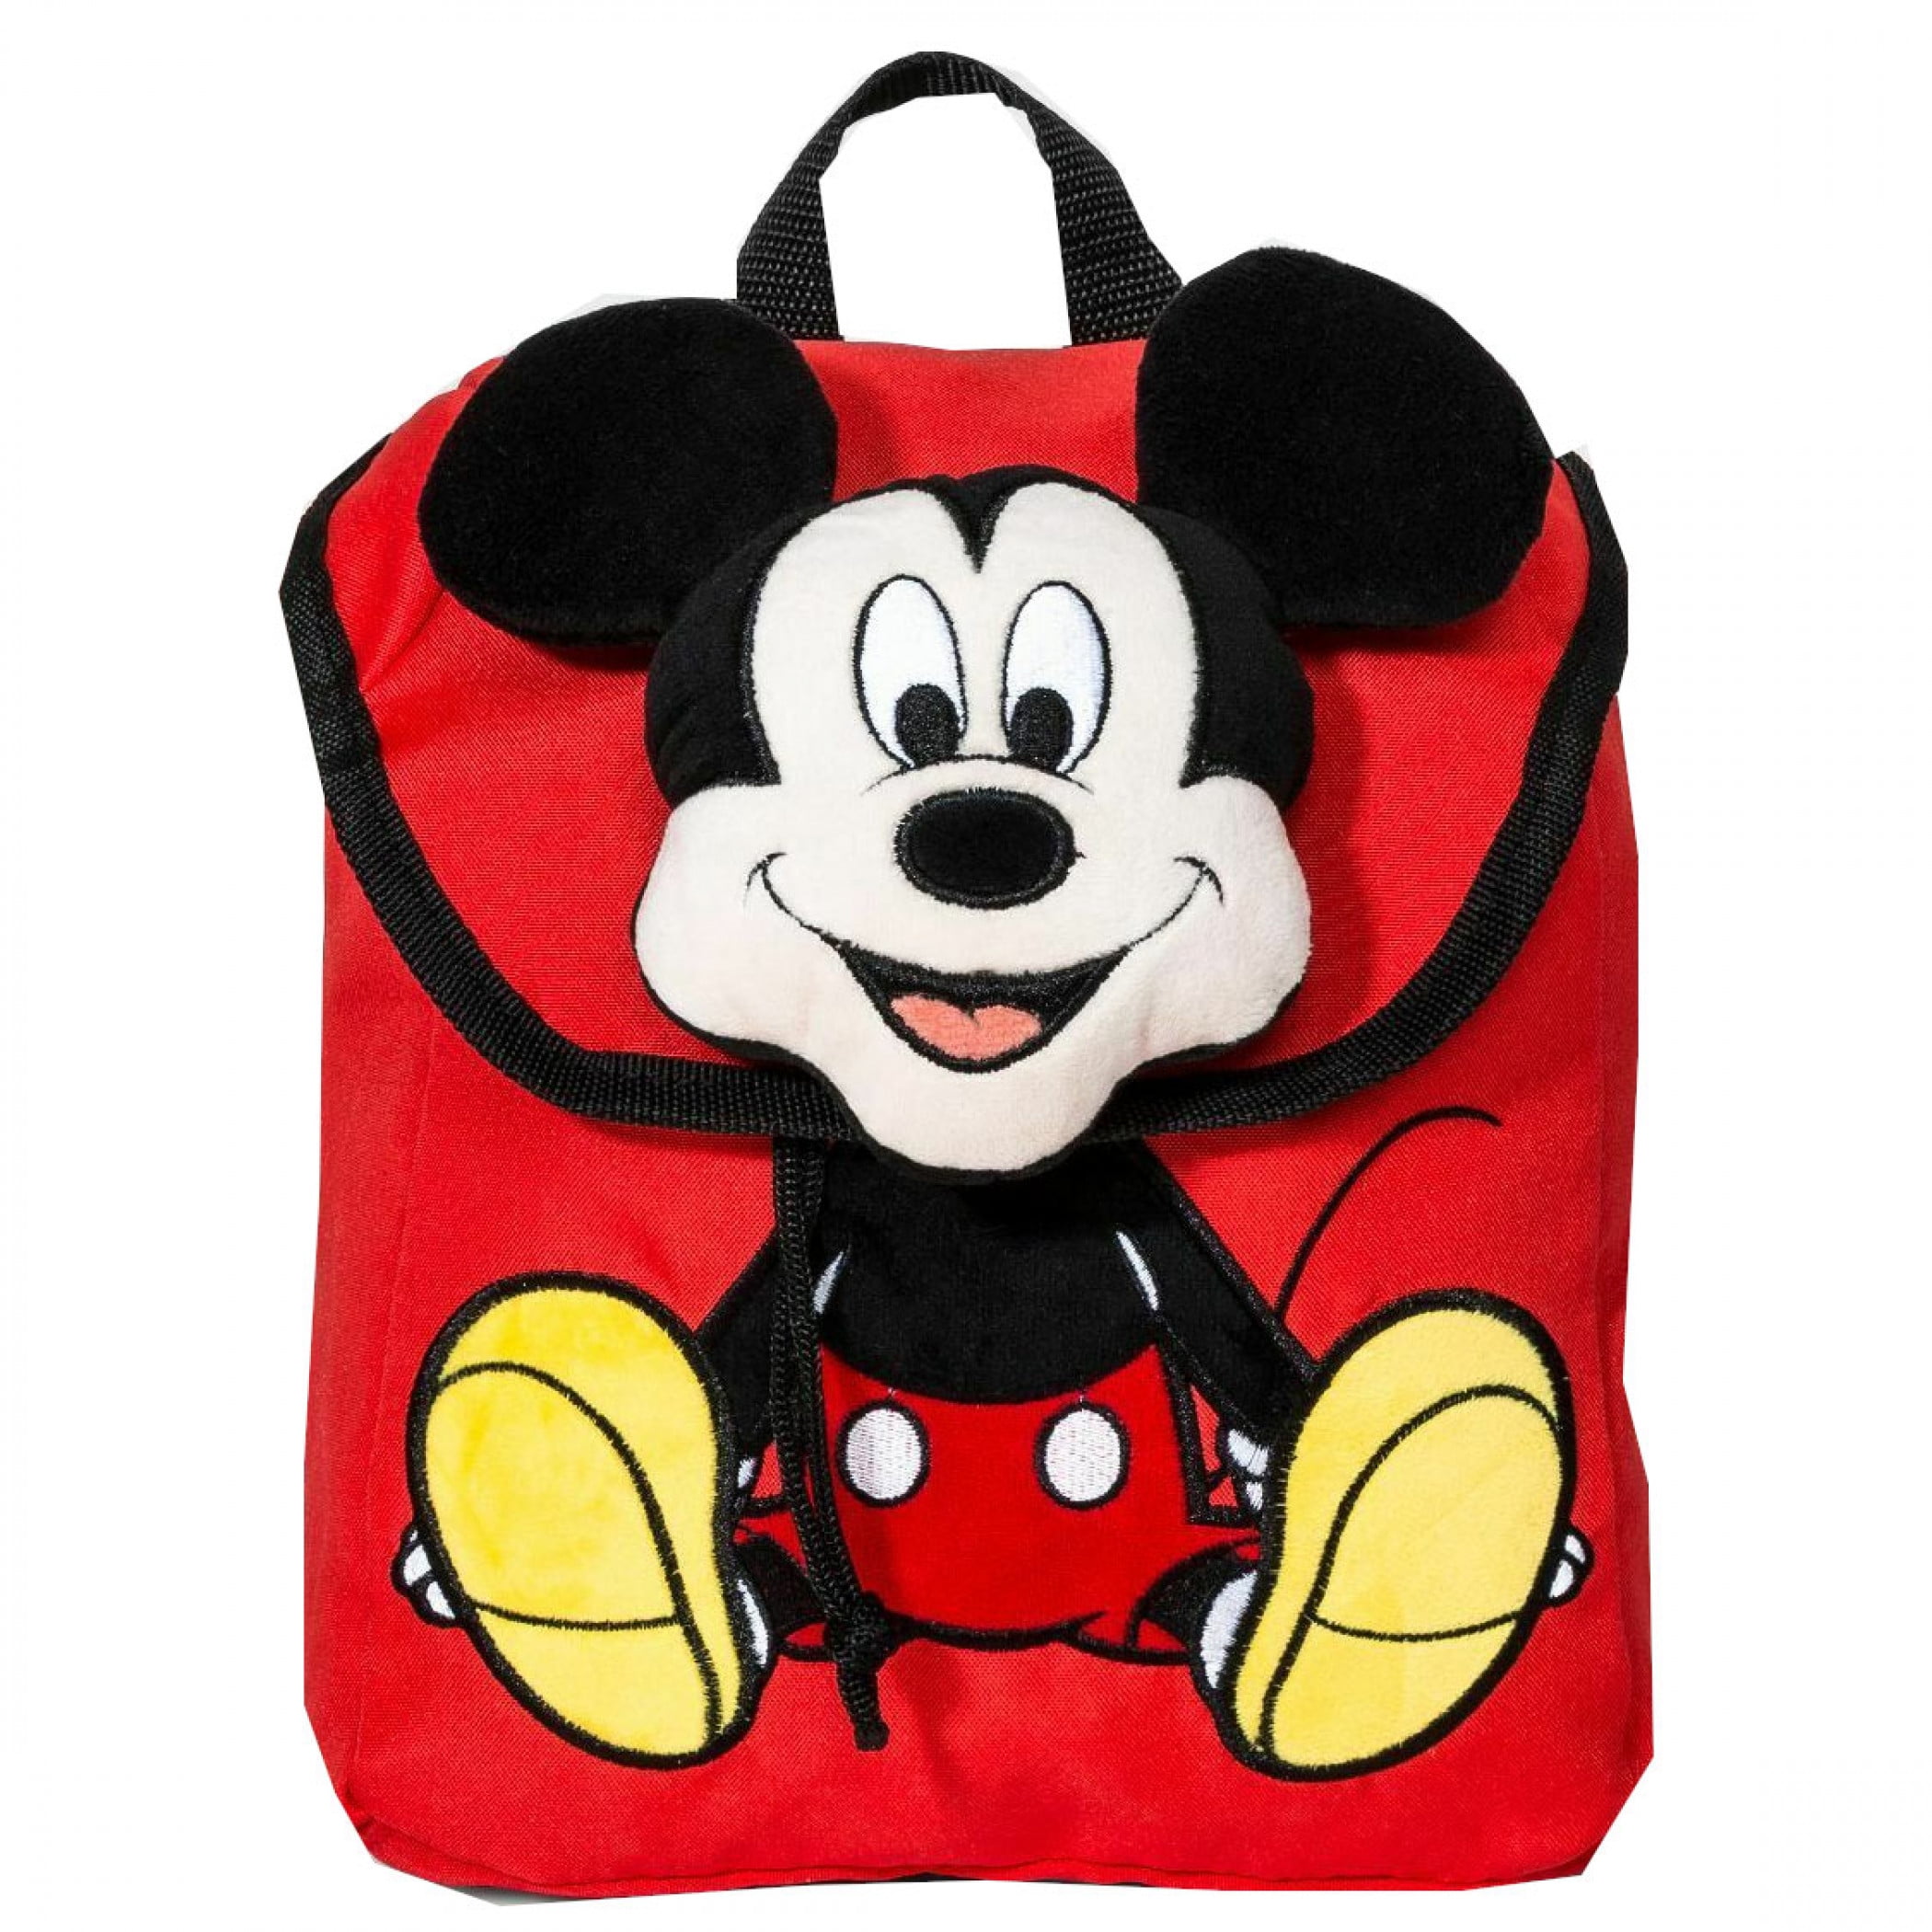 NEW MICKEY MOUSE PLUSH BACKPACK DOLL BAG STUFFED TOY FIGURE LICENSED DISNEY 20" 